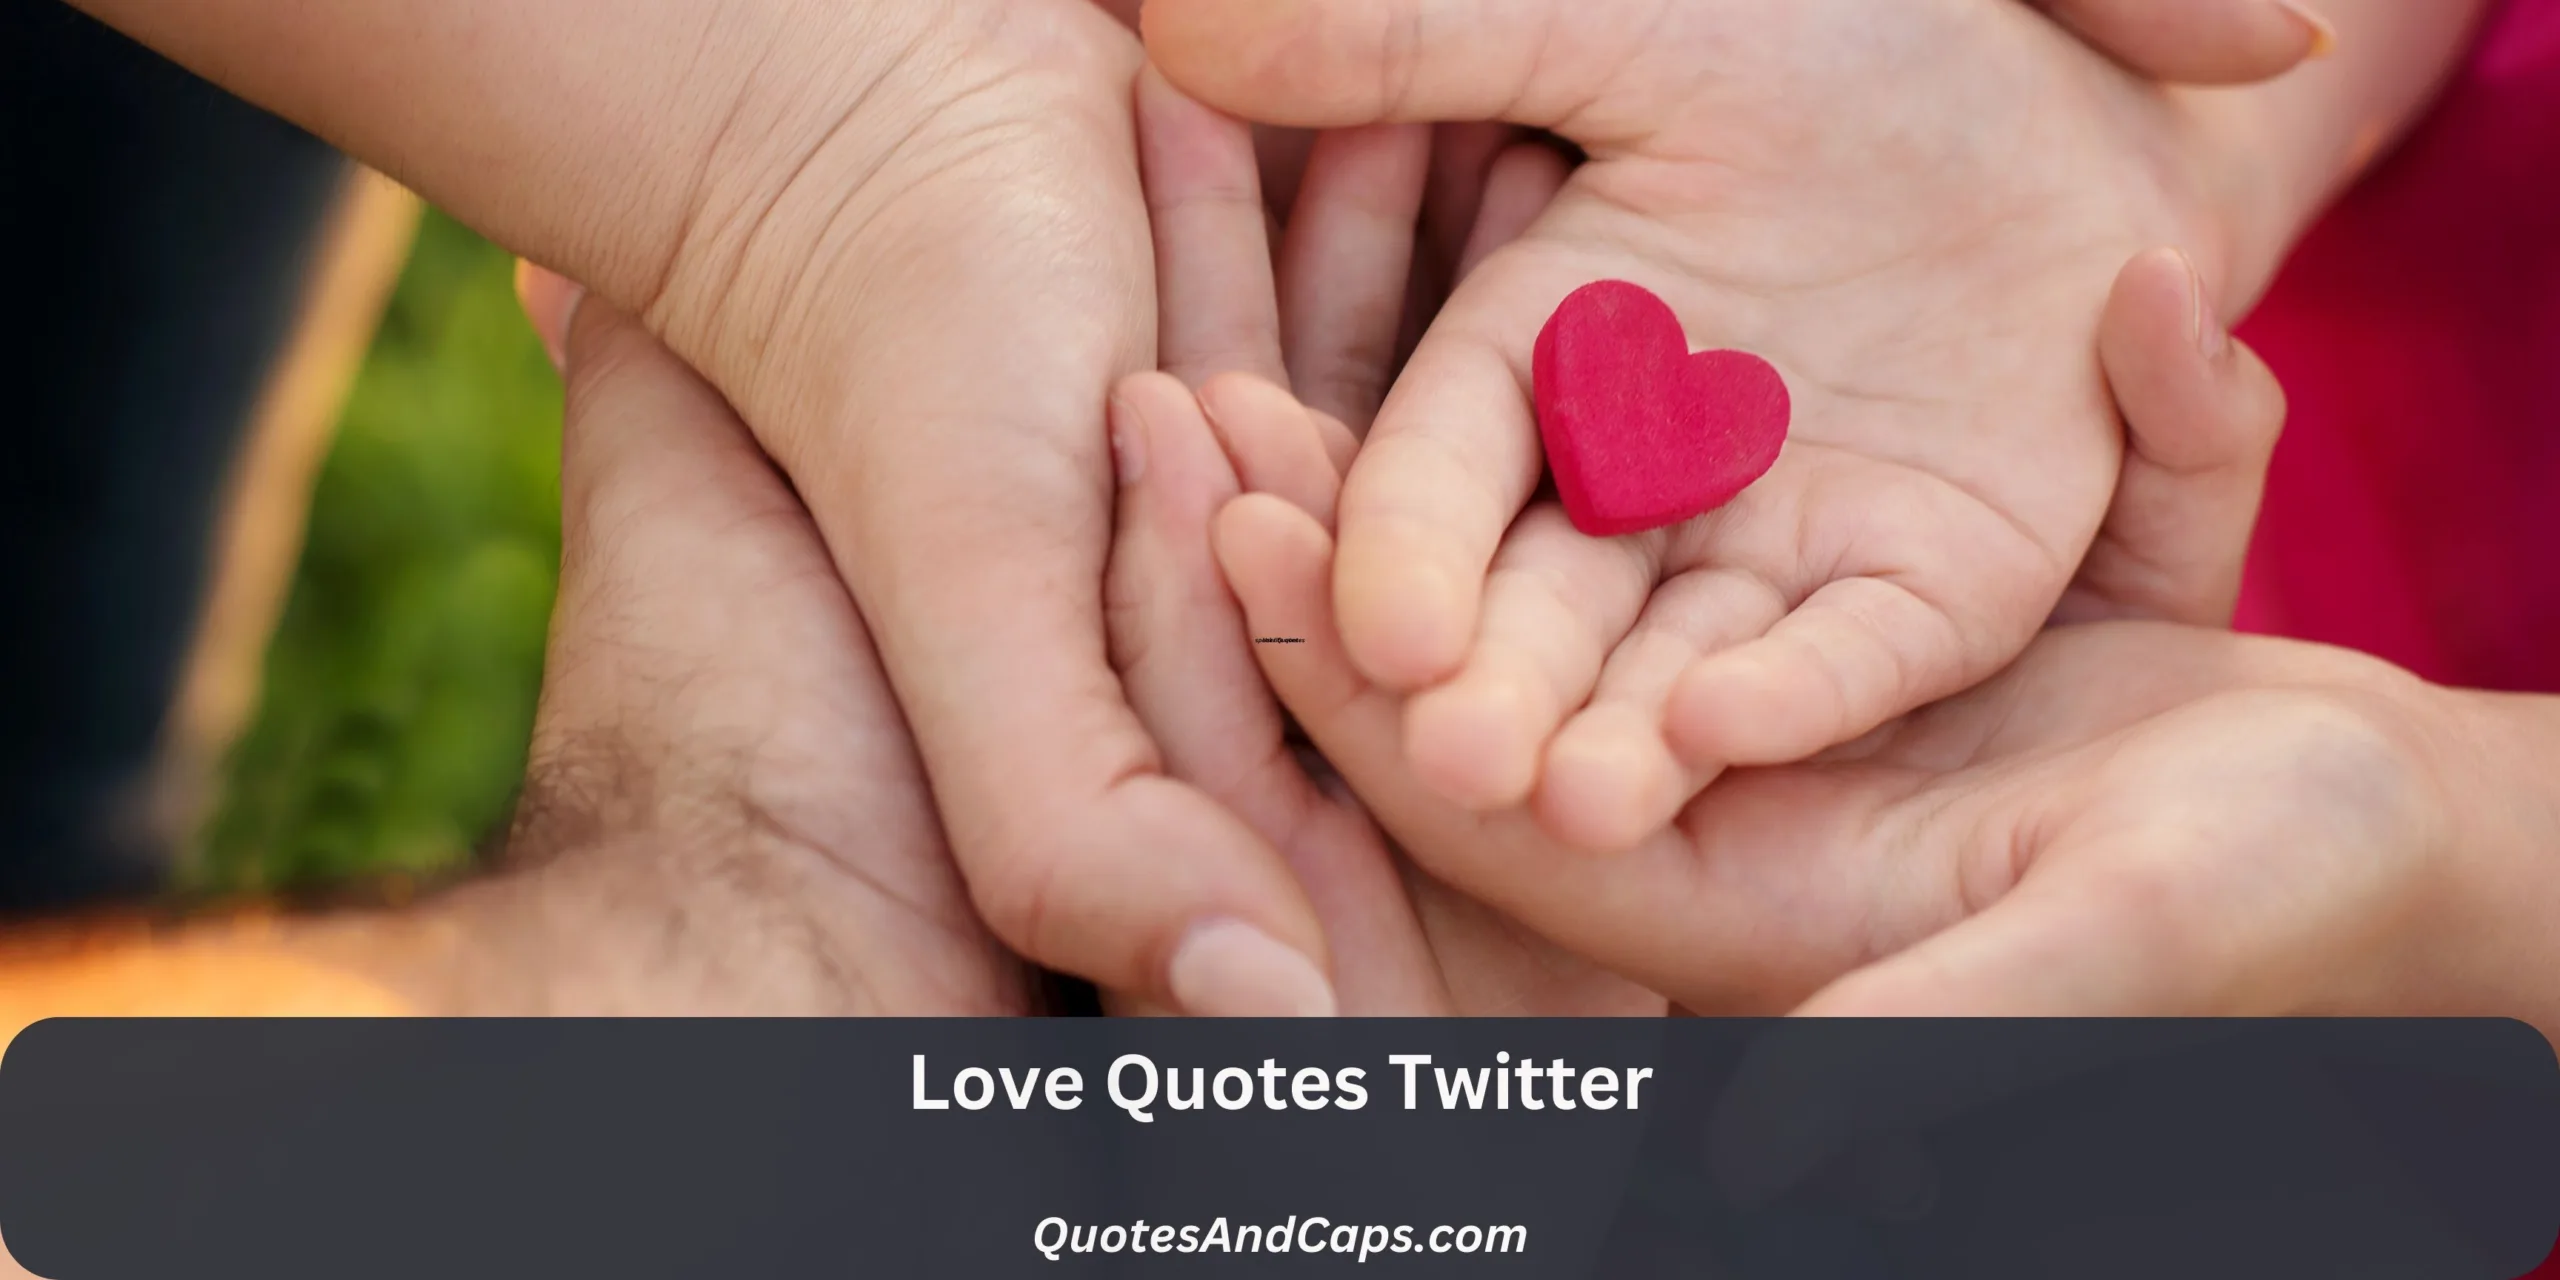 Love Quotes Twitter